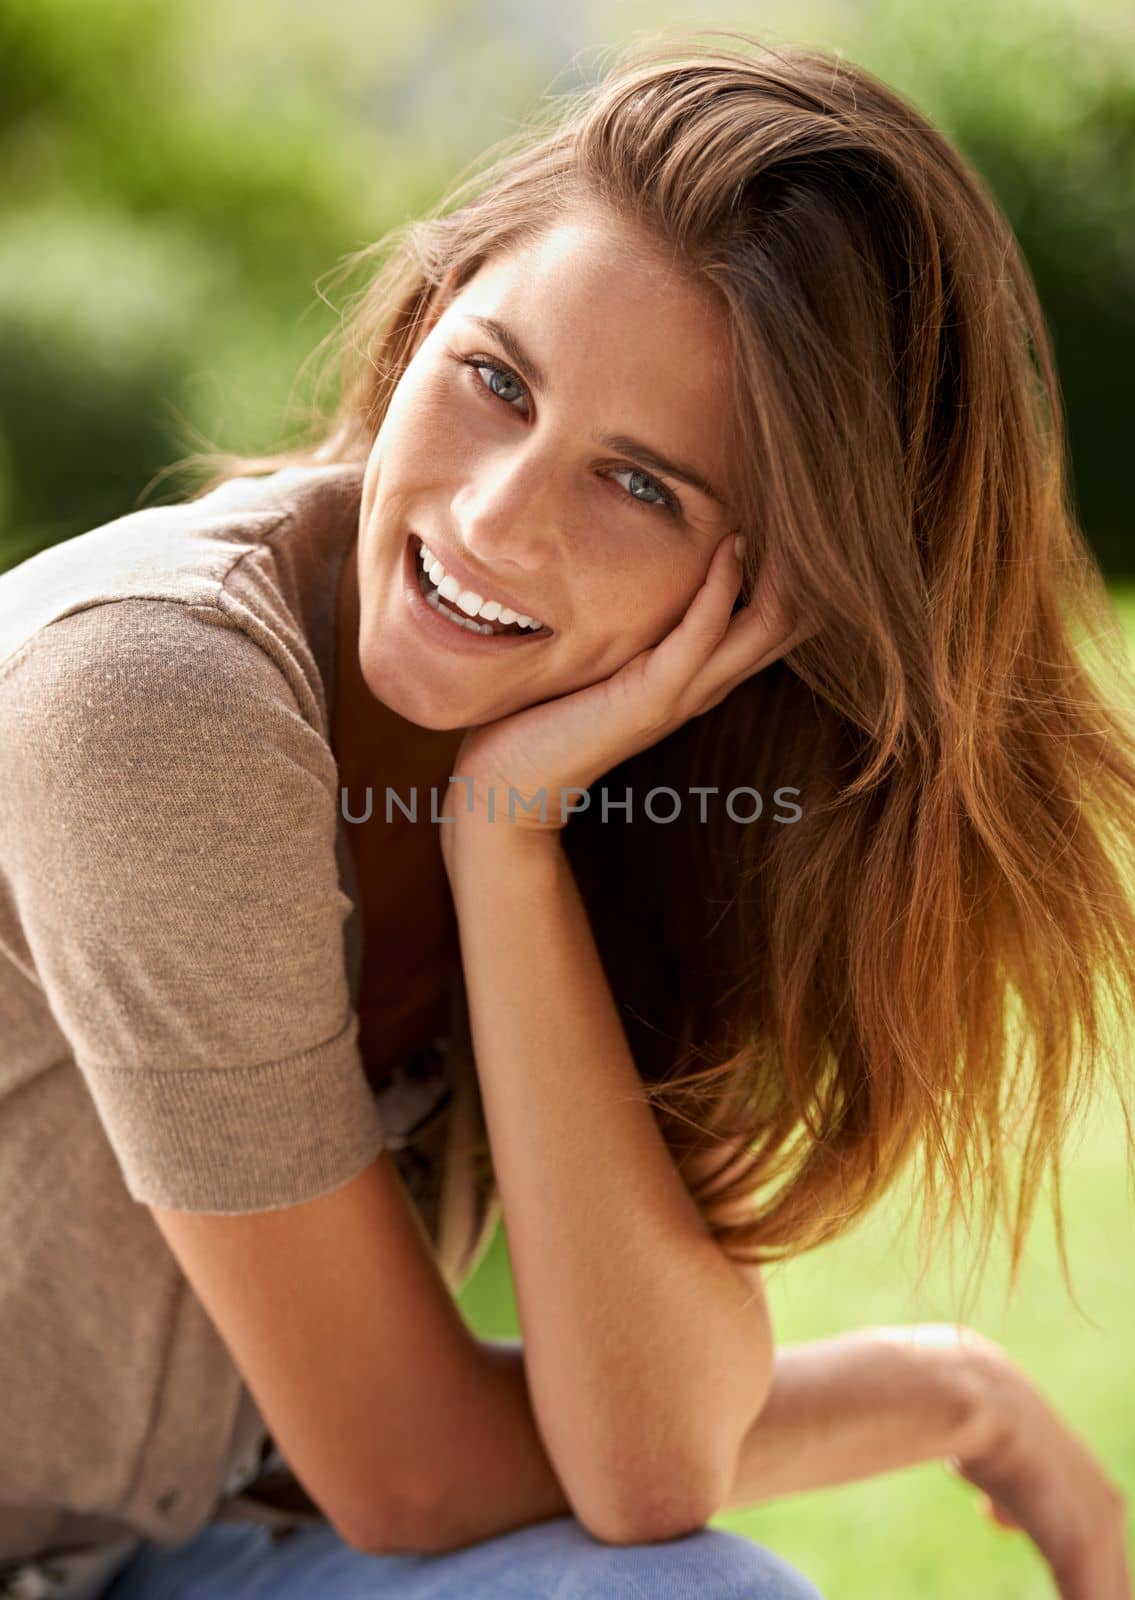 Smelling the sunshine and outdoors. a beautiful young woman relaxing in the outdoors. by YuriArcurs